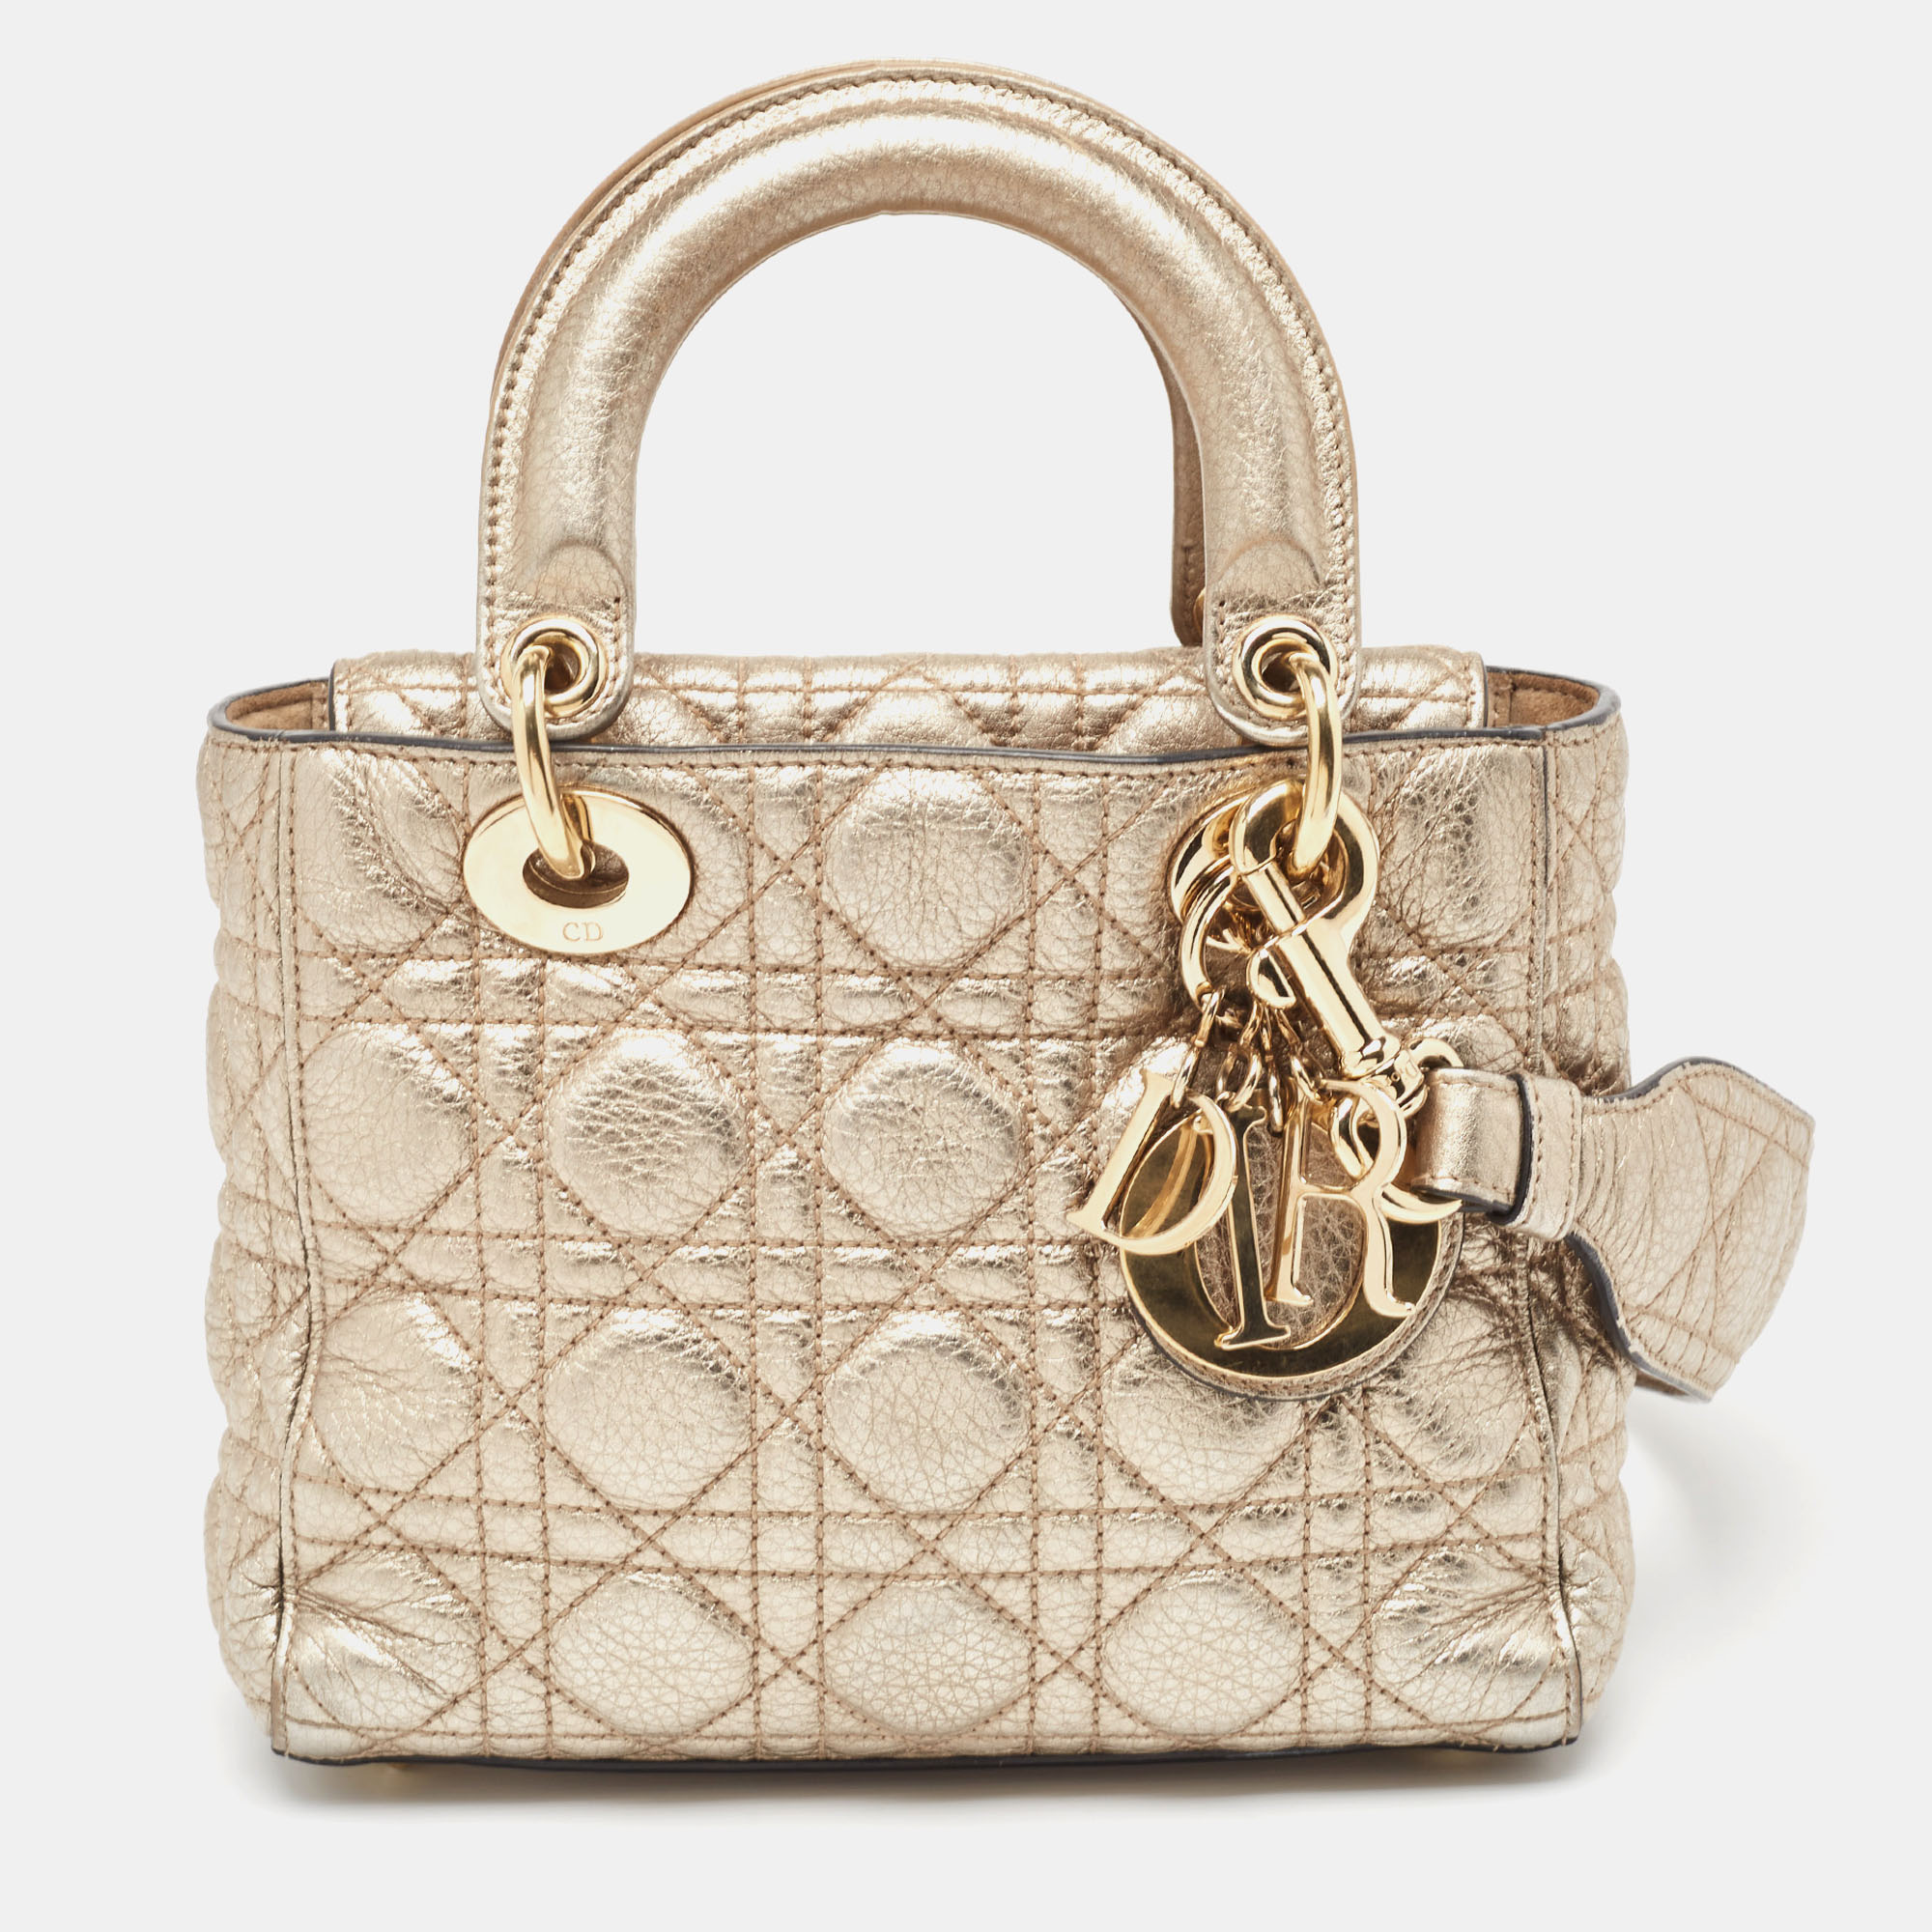 Dior gold cannage leather small soft lady dior tote